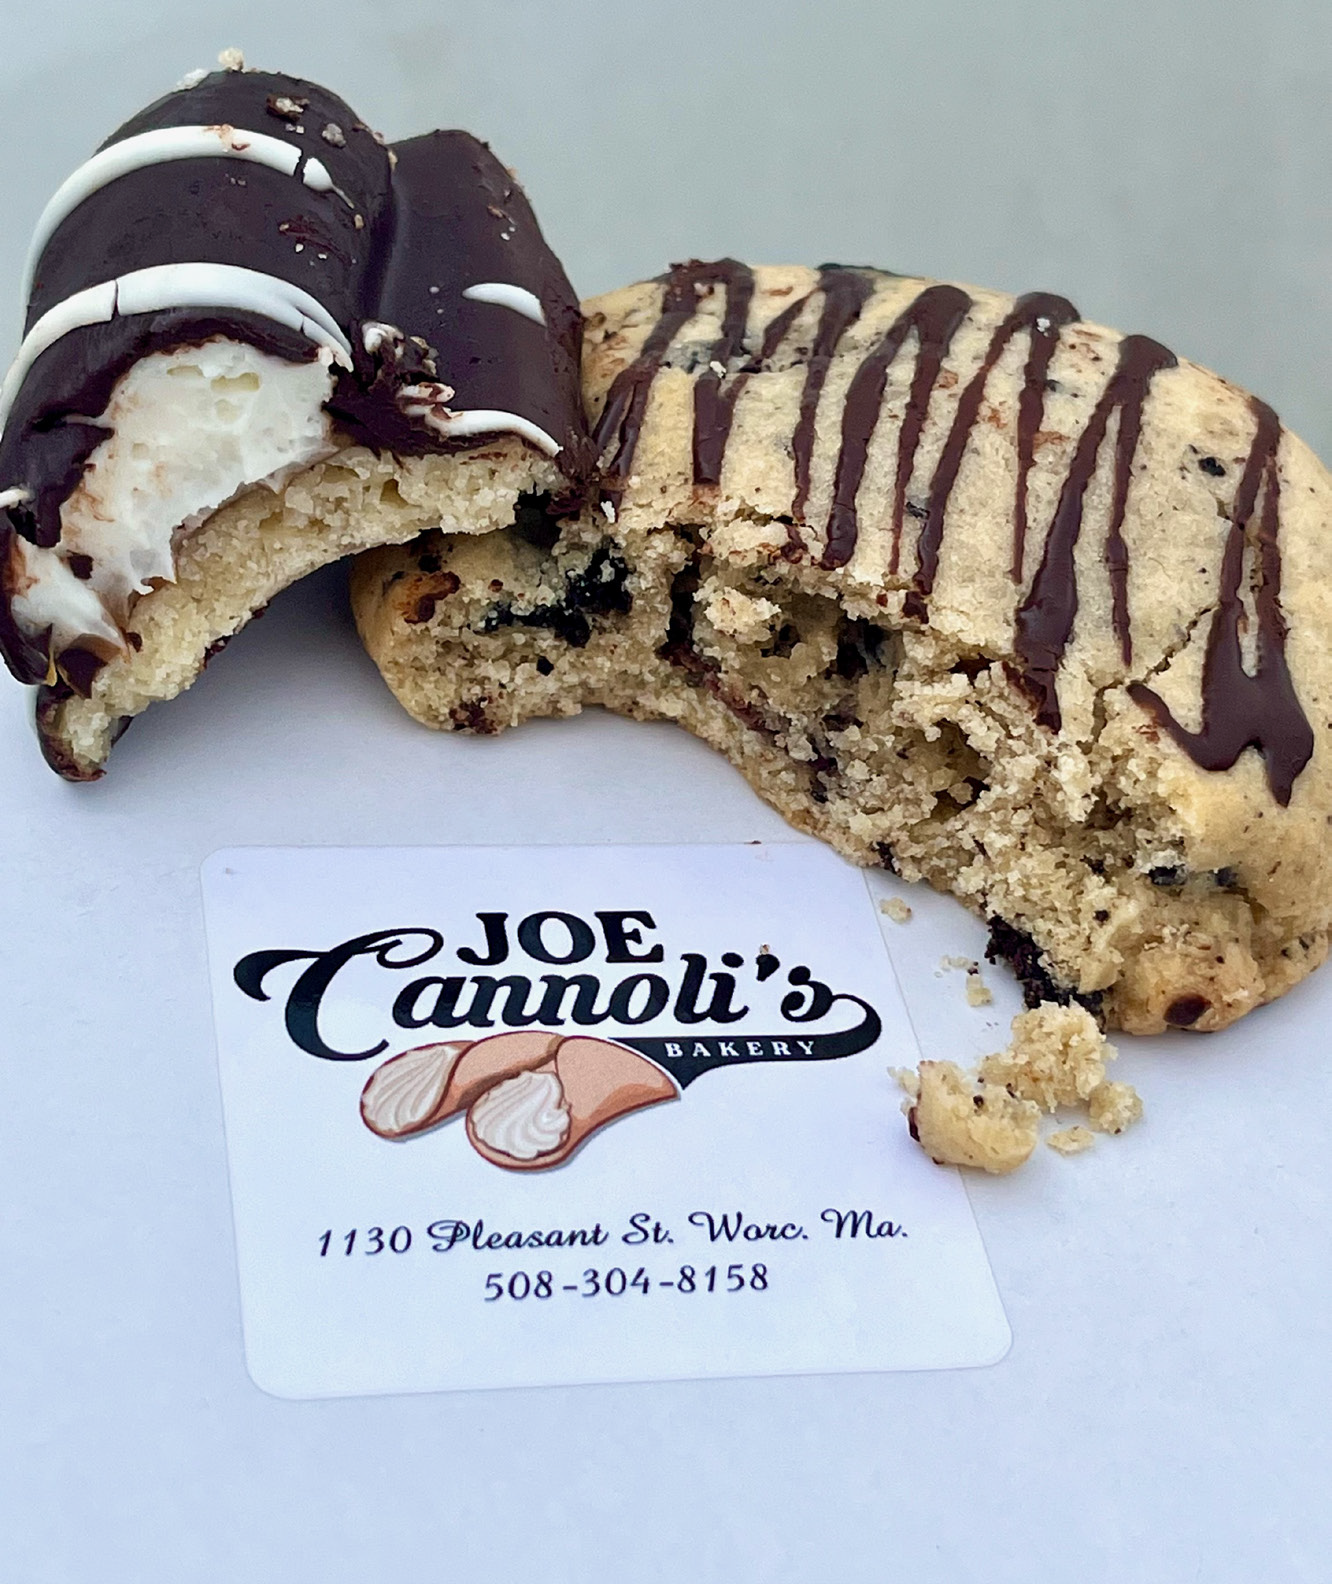 The New but Booming, Joe Cannoli of Worcester Ma 